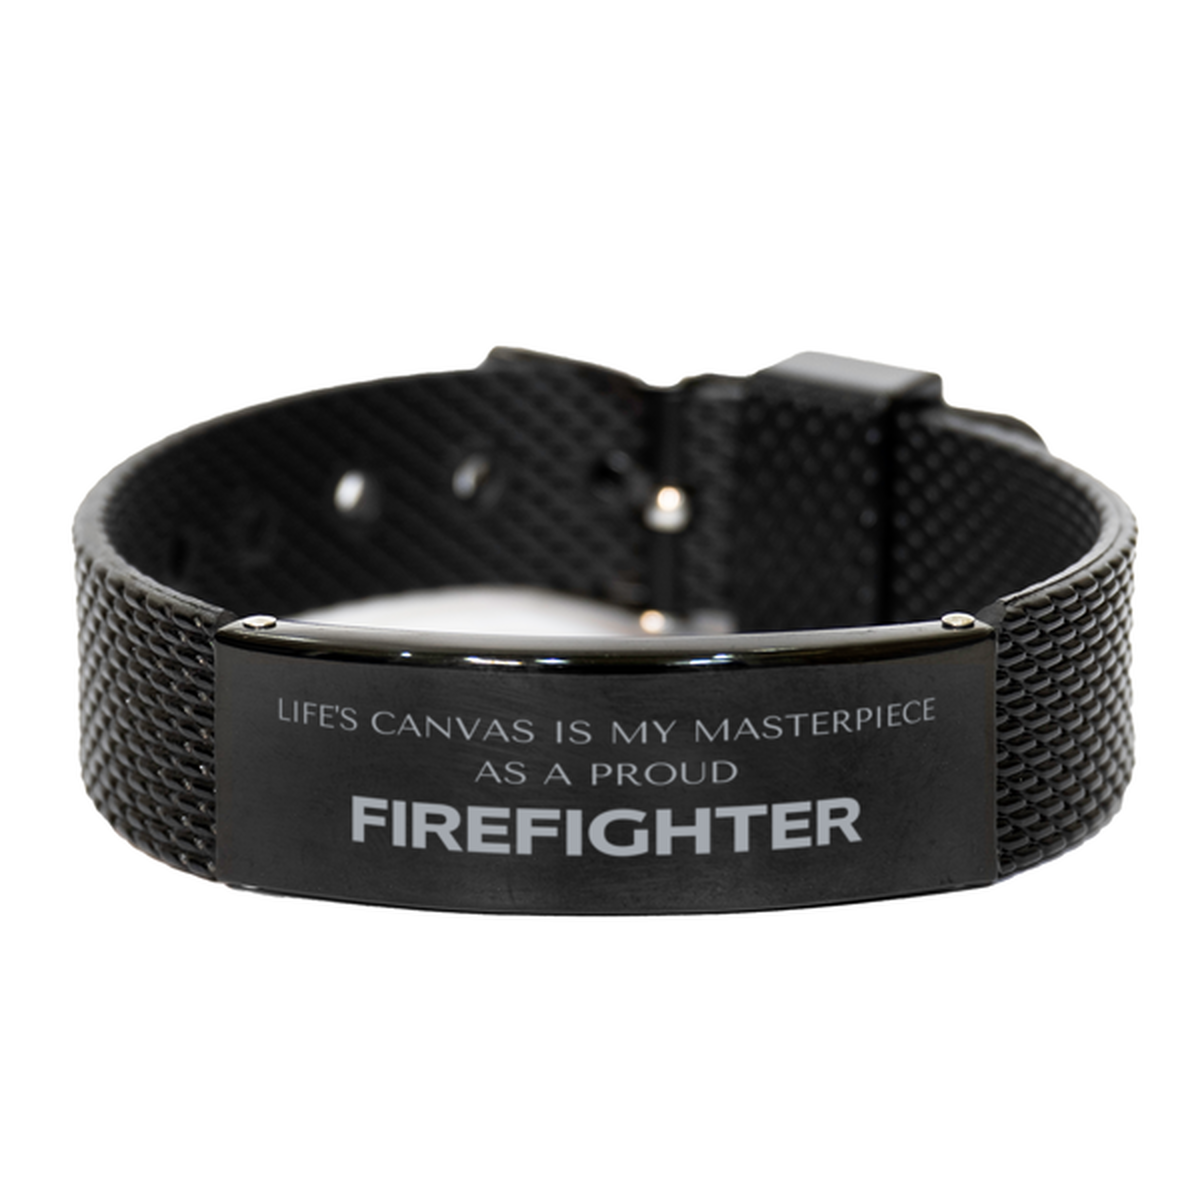 Proud Firefighter Gifts, Life's canvas is my masterpiece, Epic Birthday Christmas Unique Black Shark Mesh Bracelet For Firefighter, Coworkers, Men, Women, Friends